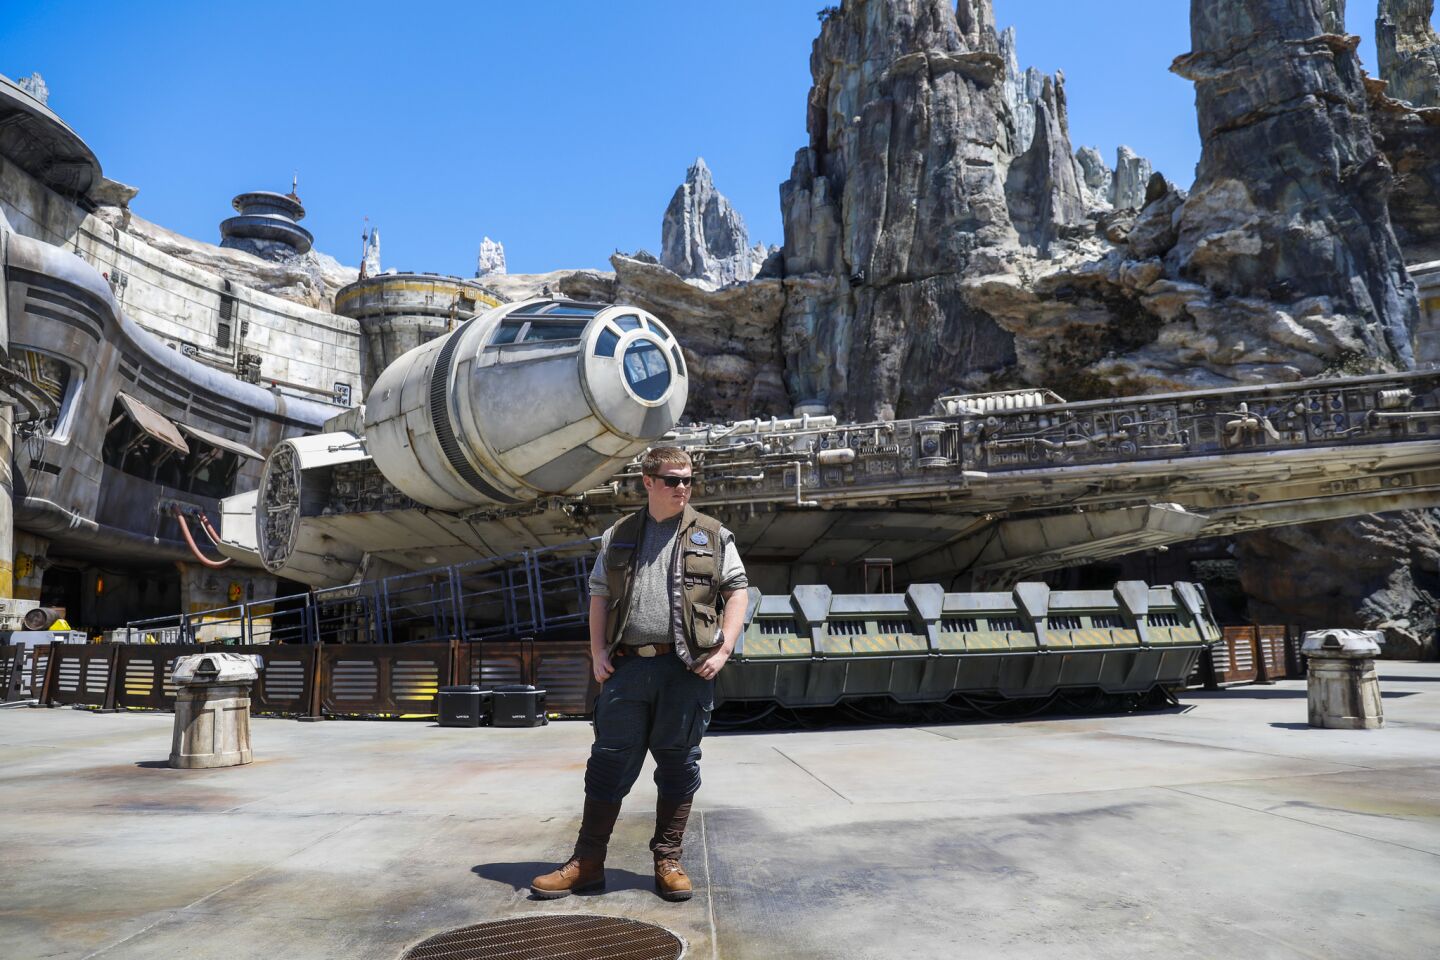 A Disney cast member stands in front of The Millennium Falcon: Smugglers Run ride inside Star Wars: Galaxy's Edge.